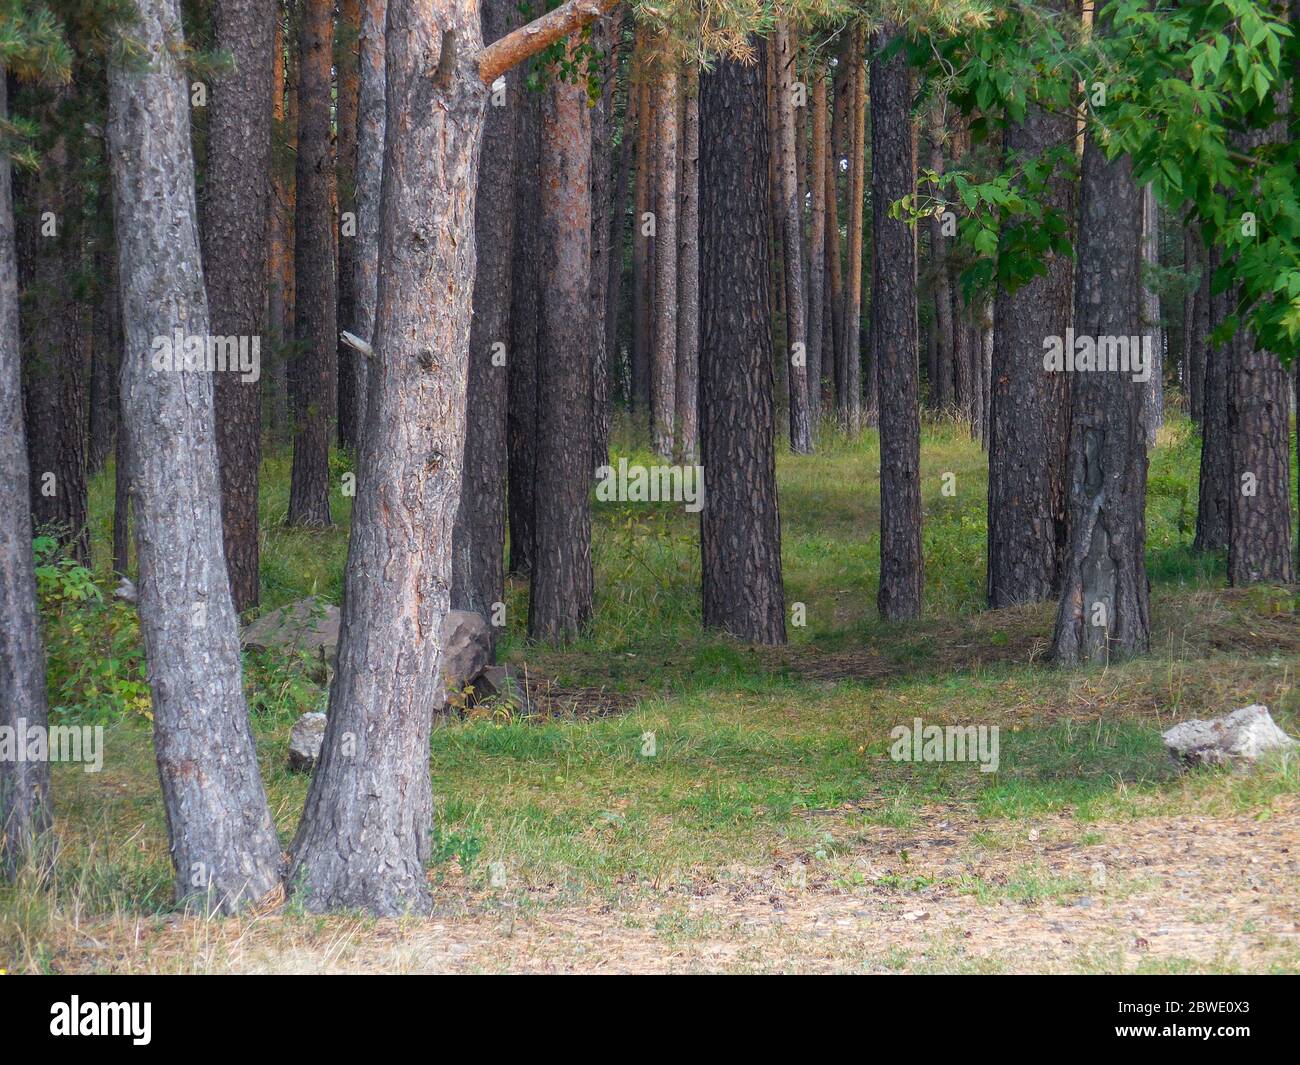 chelyabinsk, russia 06 06 2019: Trunks of trees in the pine forest in summer. Trunk of trees. Stock Photo